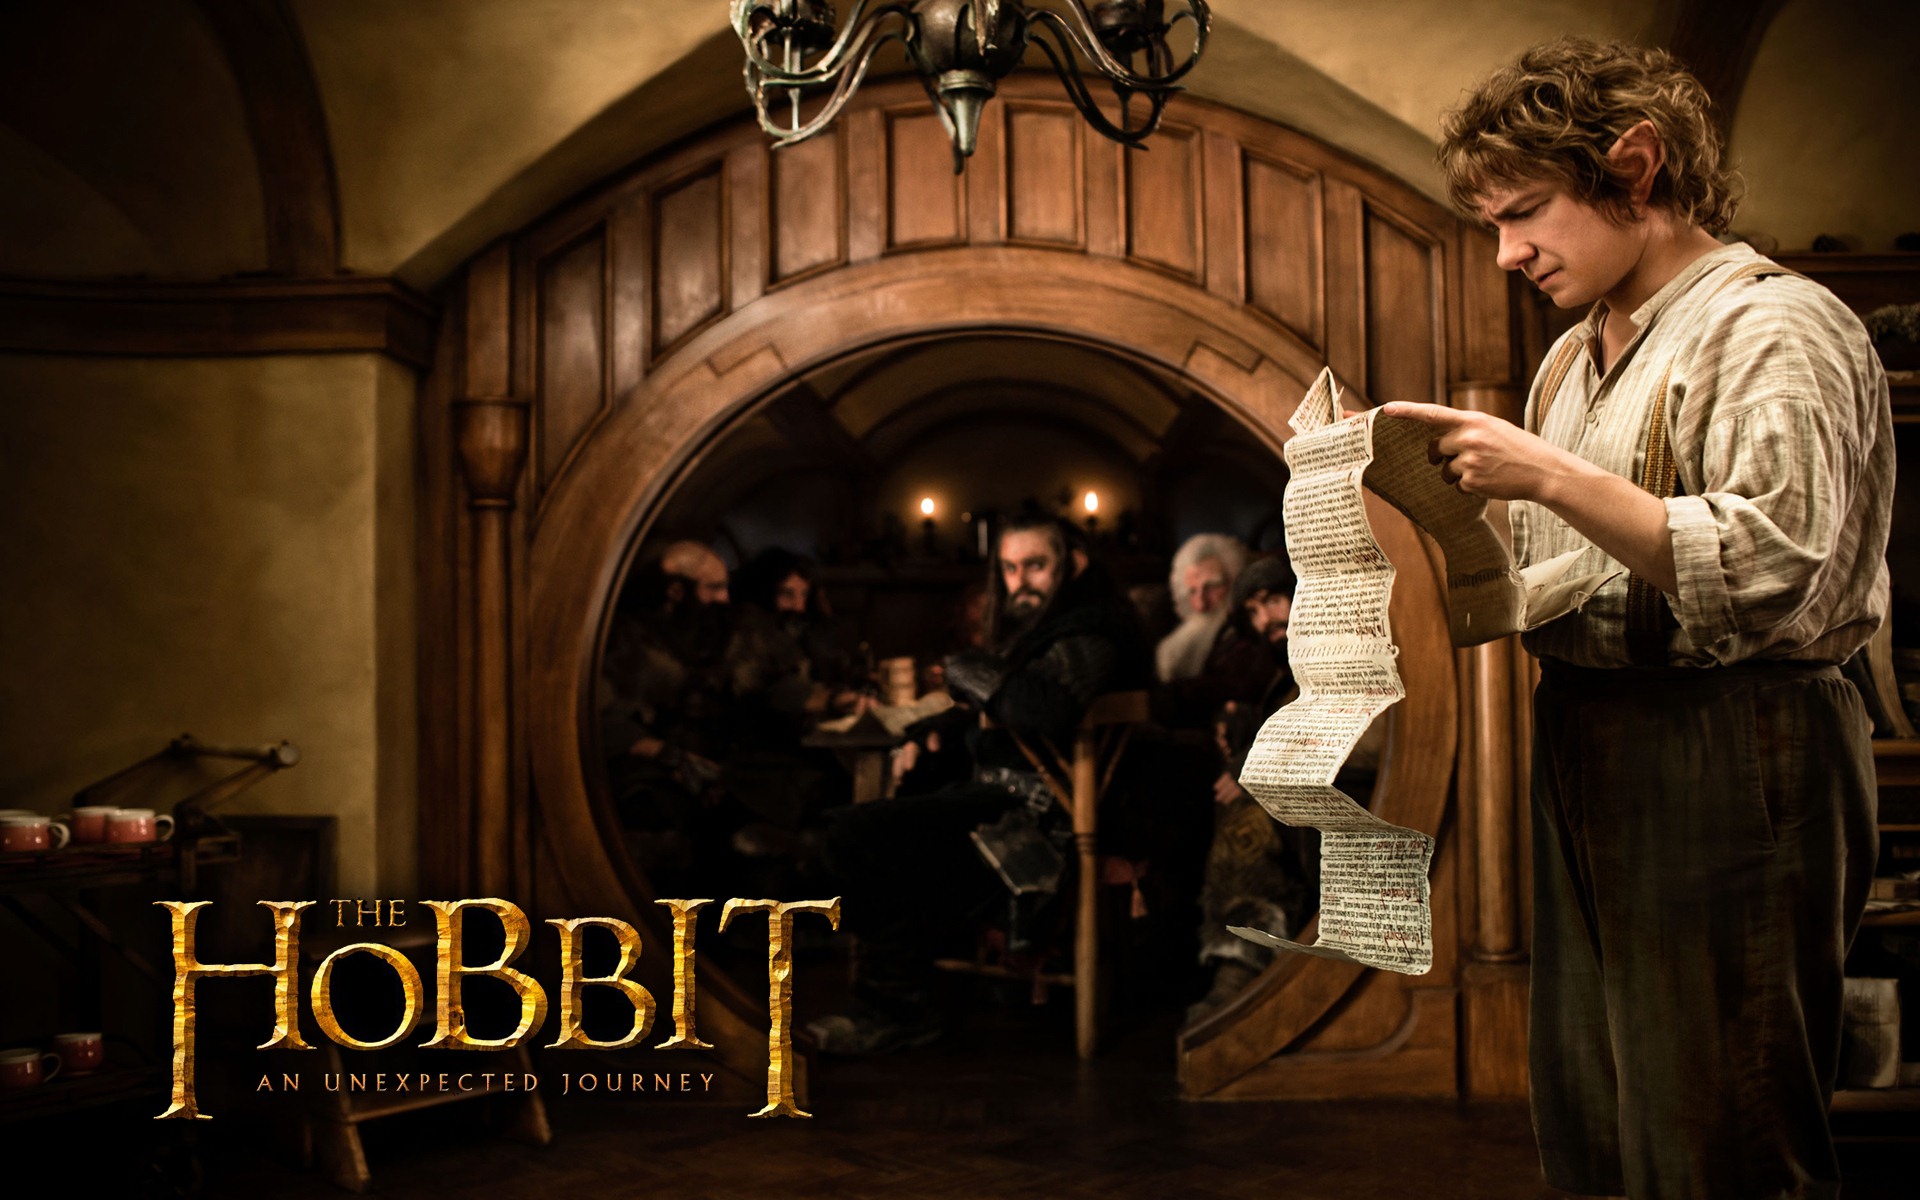 The Hobbit: An Unexpected Journey HD wallpapers #12 - 1920x1200